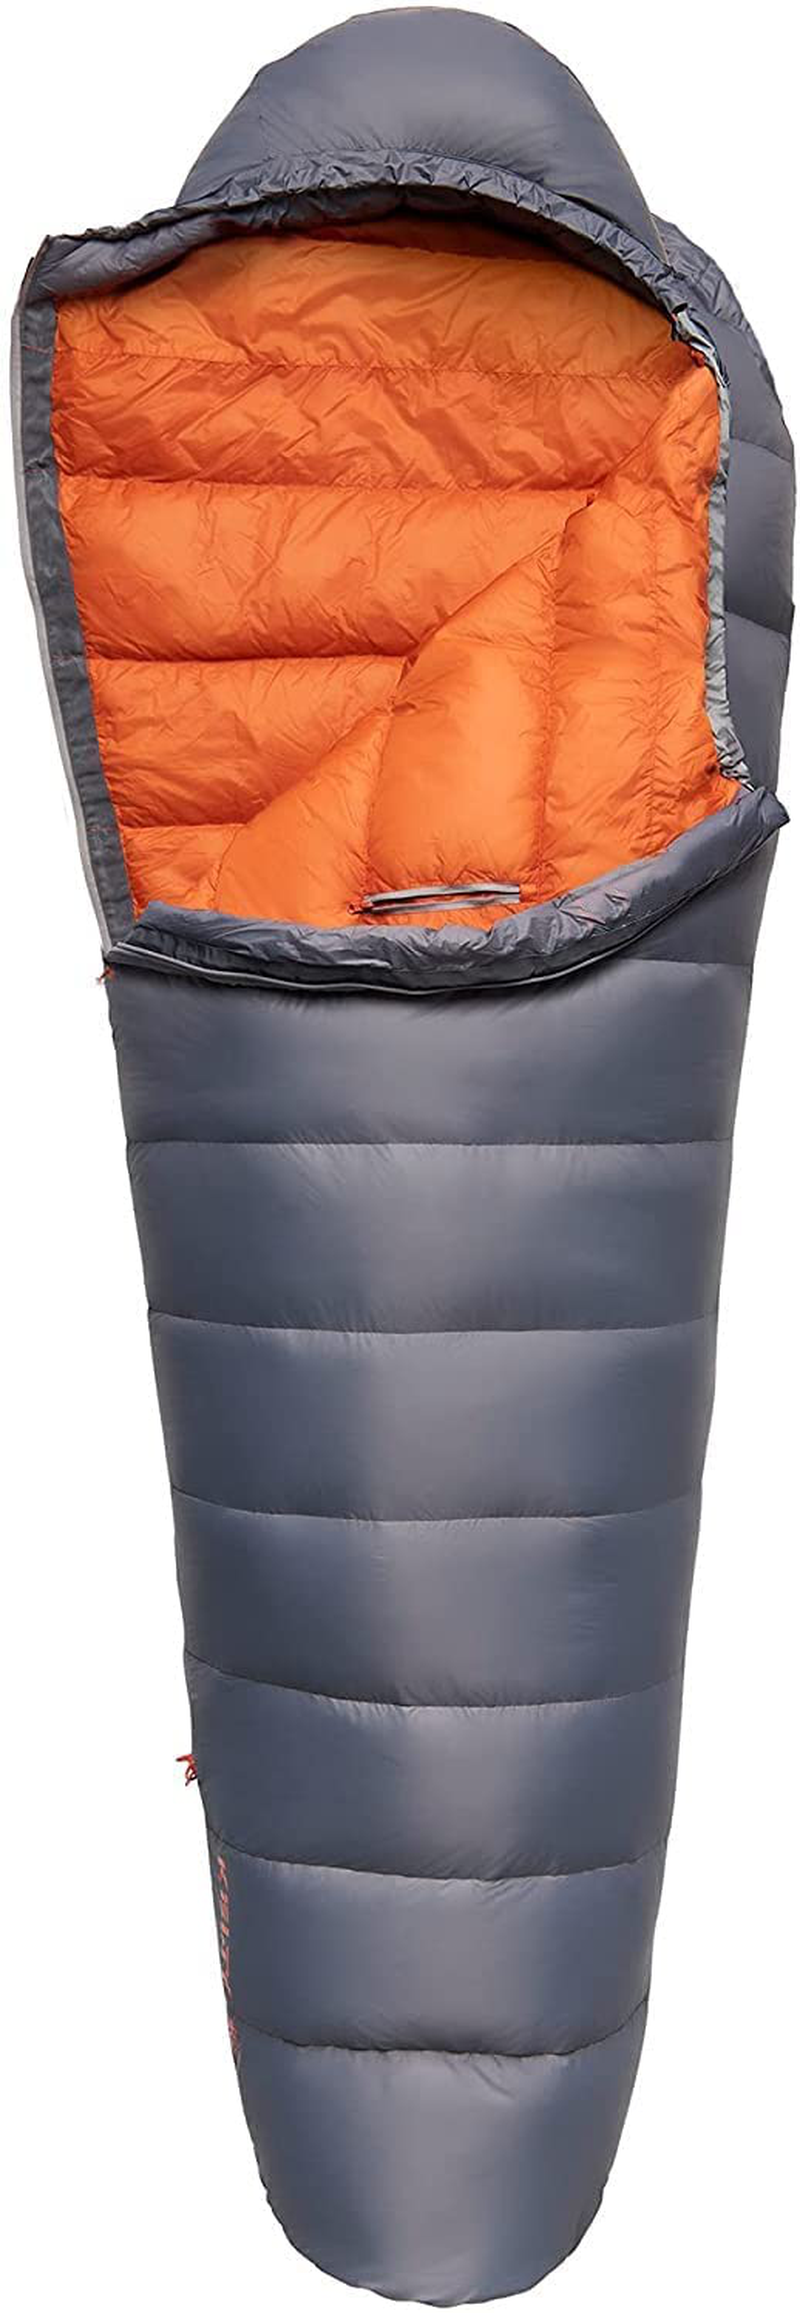 HOUXIAN Mummy Sleeping Bag Compact, 0 Degree Fill Power Hydrophobic Goose down Sleeping Bag with Base - Ultra Lightweight 4 Season Camping, Hiking, Traveling, Backpacking and Outdoor Sporting Goods > Outdoor Recreation > Camping & Hiking > Sleeping BagsSporting Goods > Outdoor Recreation > Camping & Hiking > Sleeping Bags HOUXIAN   